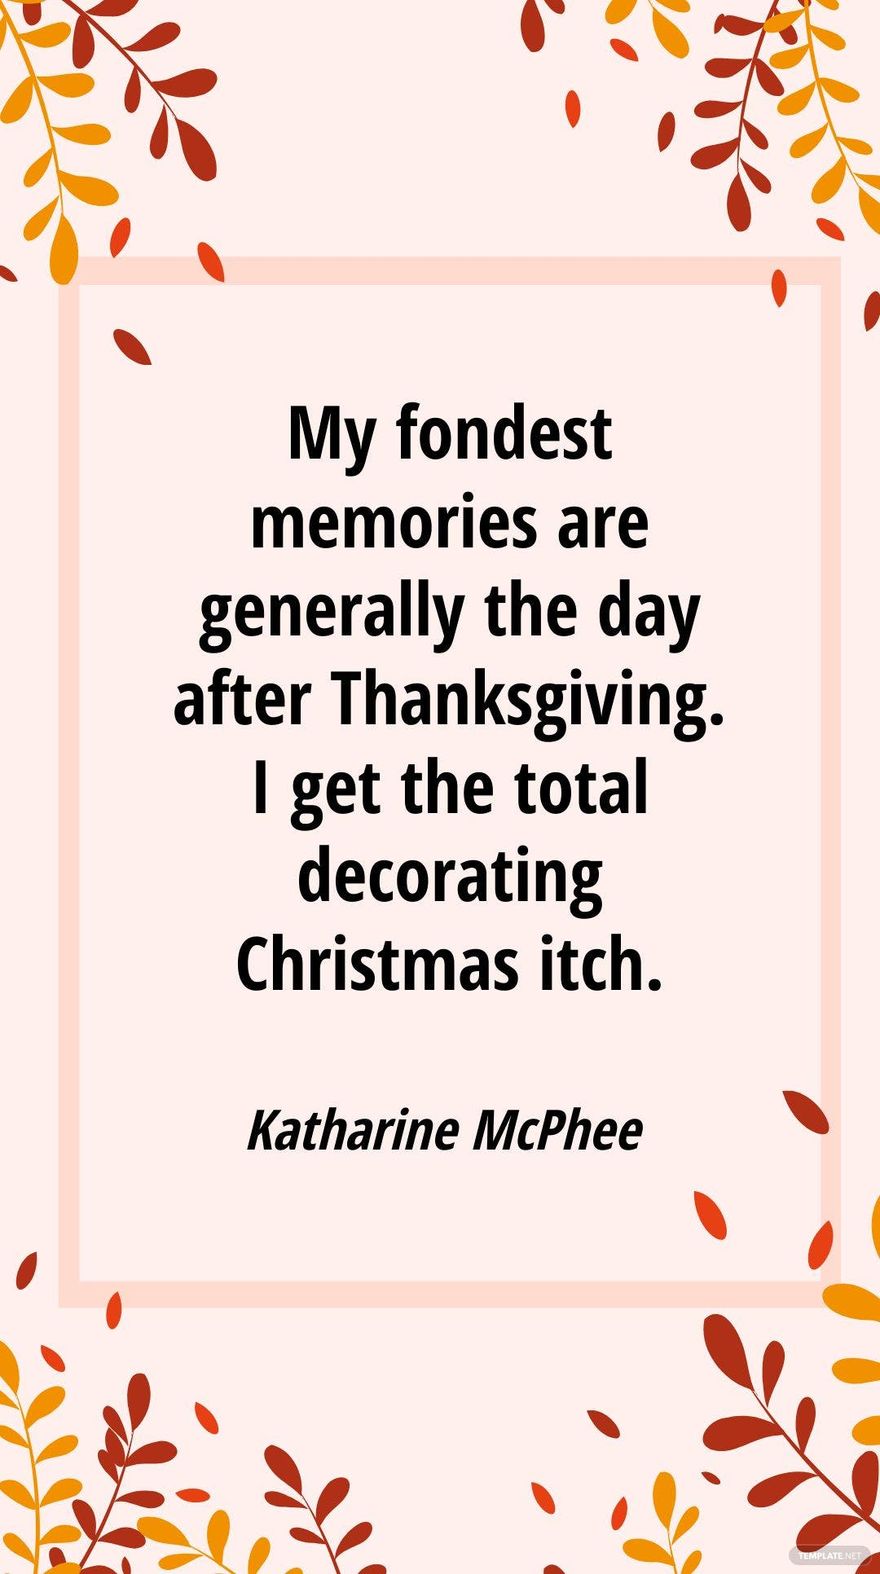 Katharine McPhee - My fondest memories are generally the day after Thanksgiving. I get the total decorating Christmas itch.